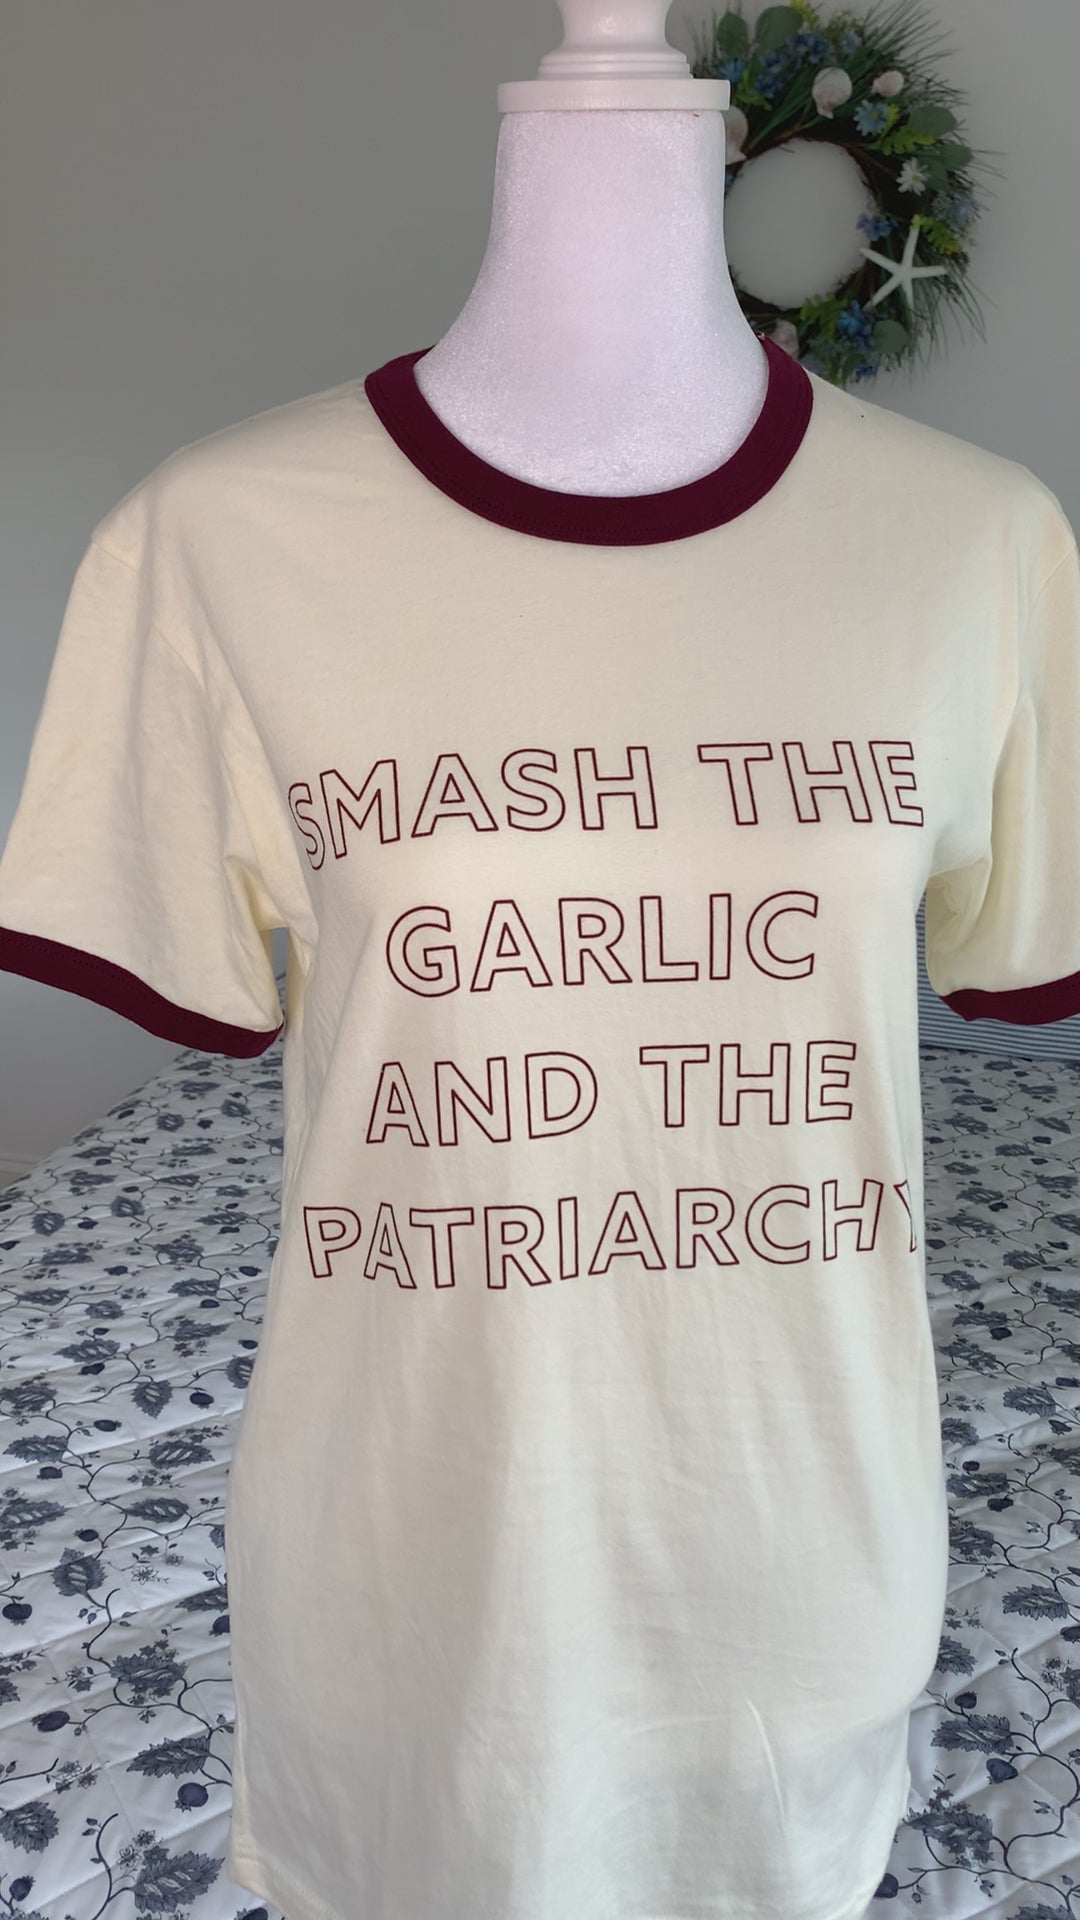 An off-white ringer tee that reads "Smash the Garlic and the Patriarchy" hangs on a manikin 